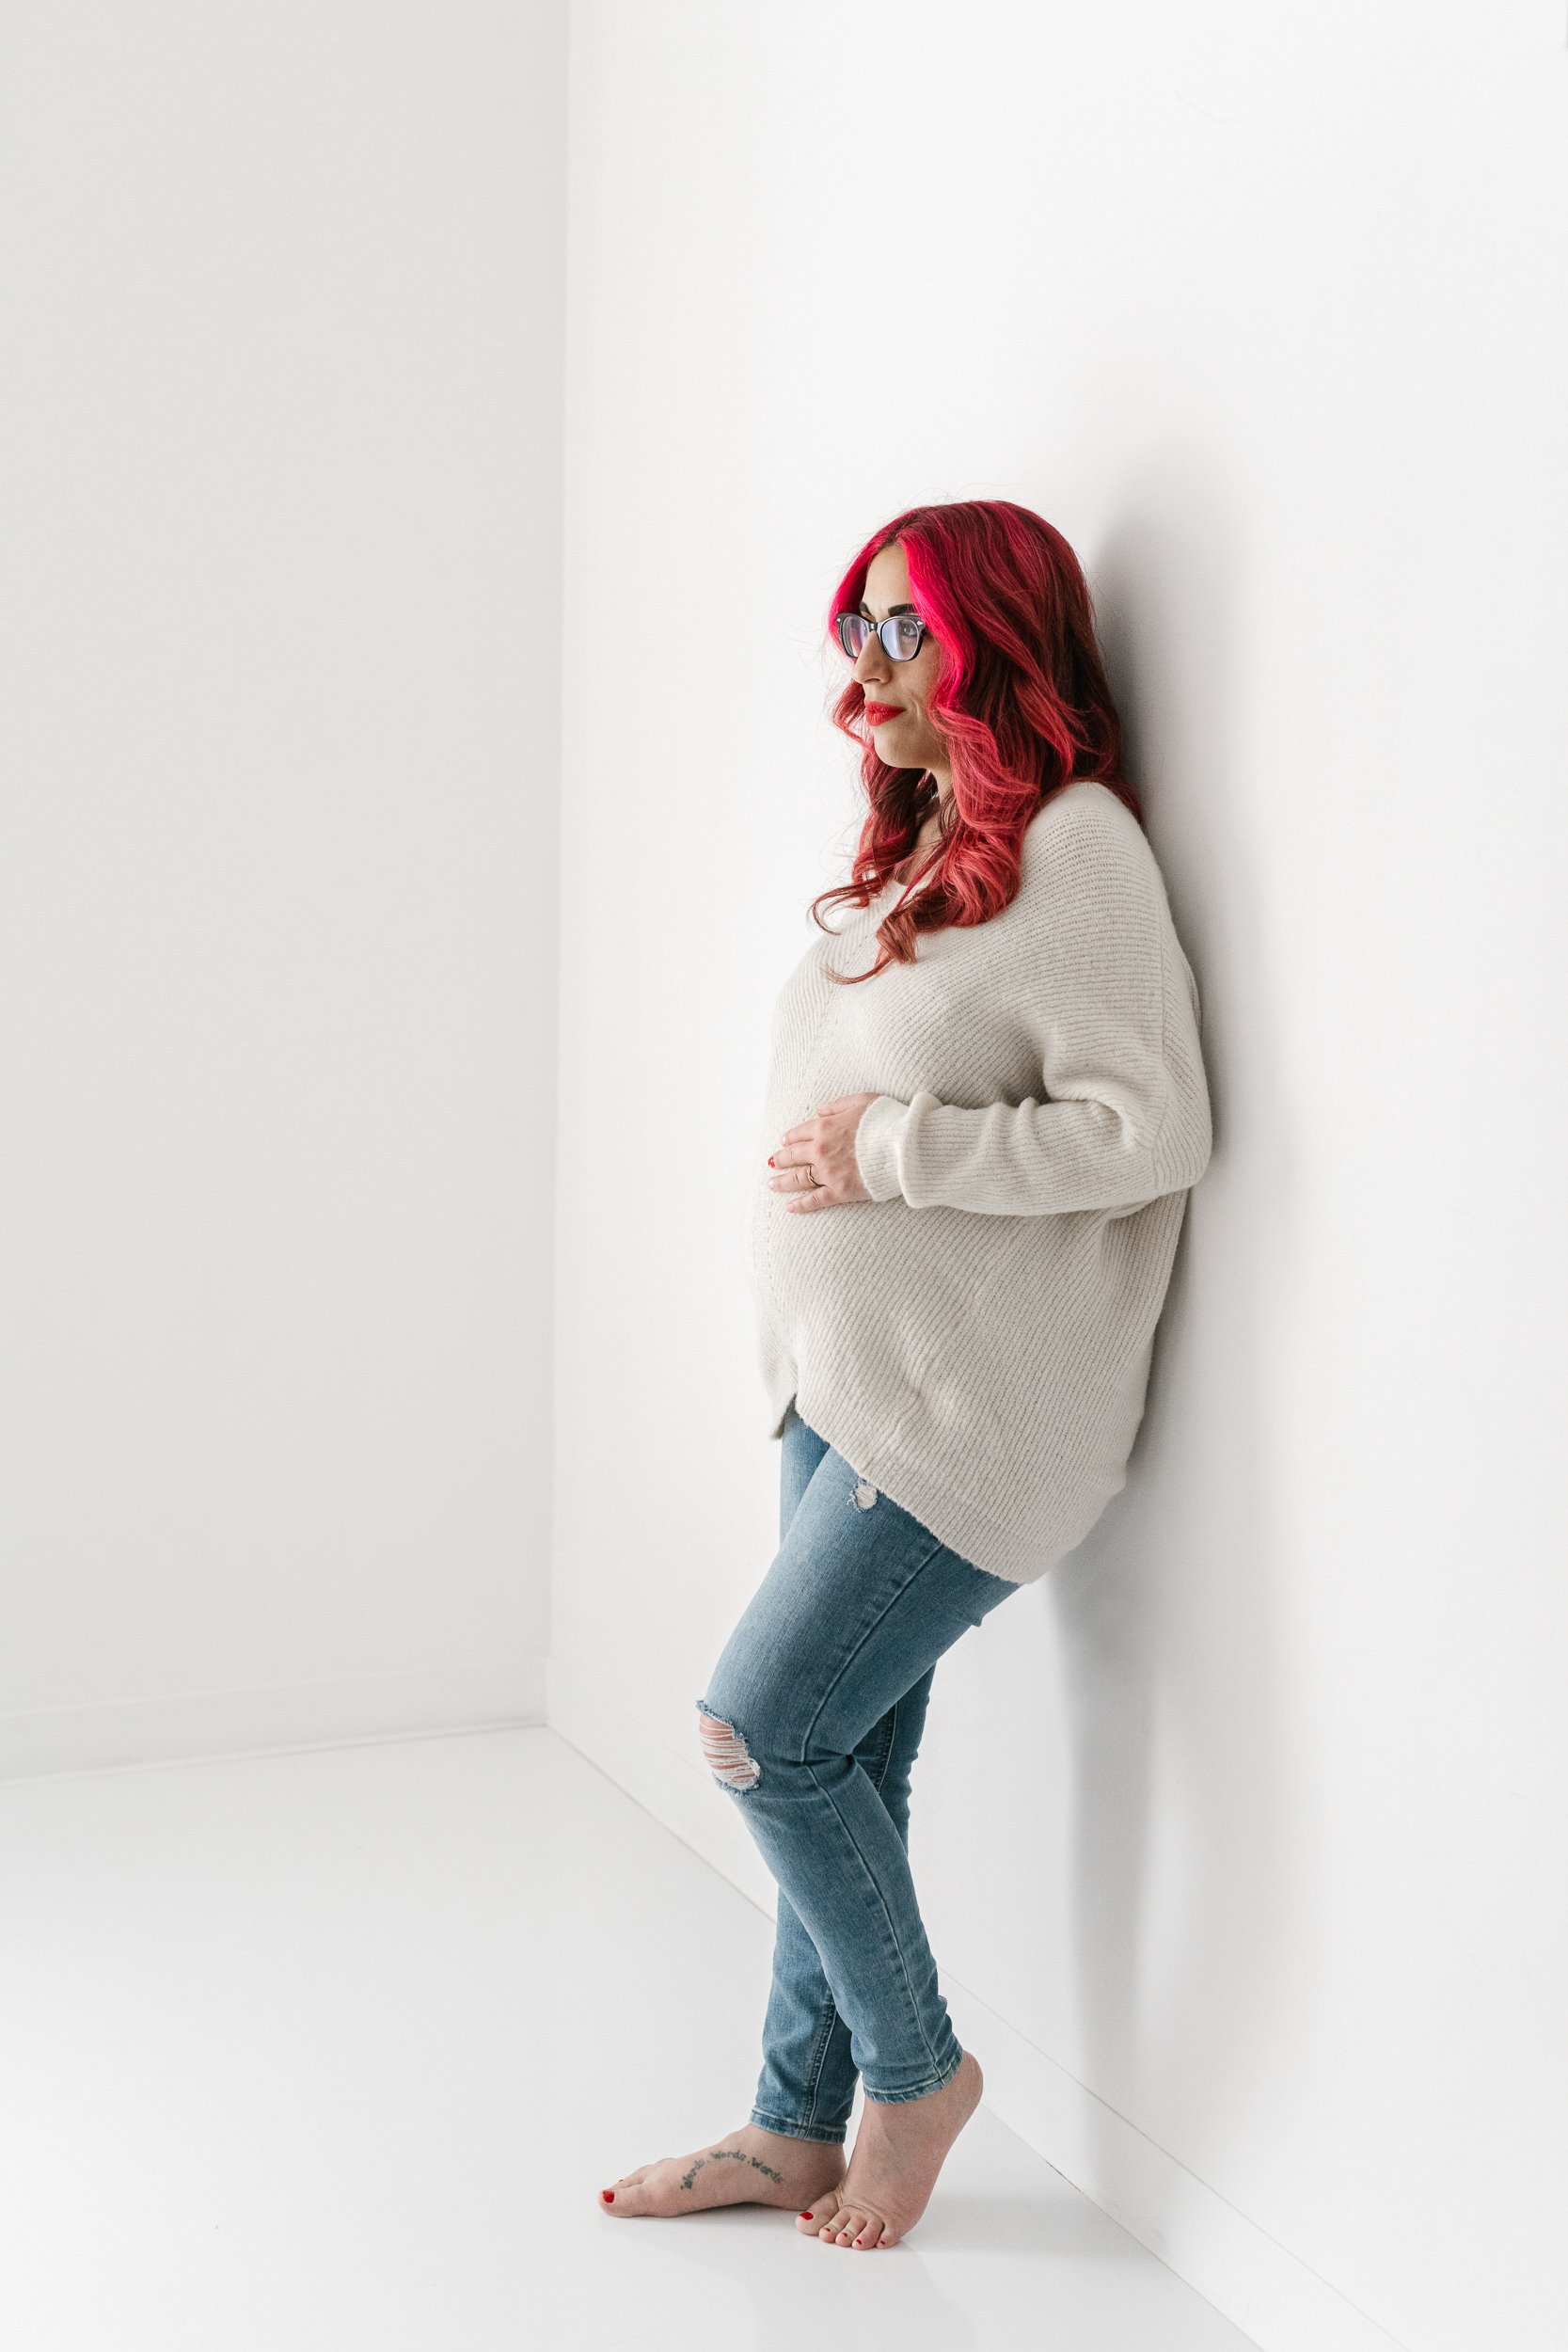  A pregnant woman wearing jeans and a sweater holds her belly by Nicole Hawkins Photography in NJ. maternity style maternity outfits NJ pics #NicoleHawkinsPhotography #maternitysession #NJmaternityphotographer #NewJerseyphotographers #maternityphotos